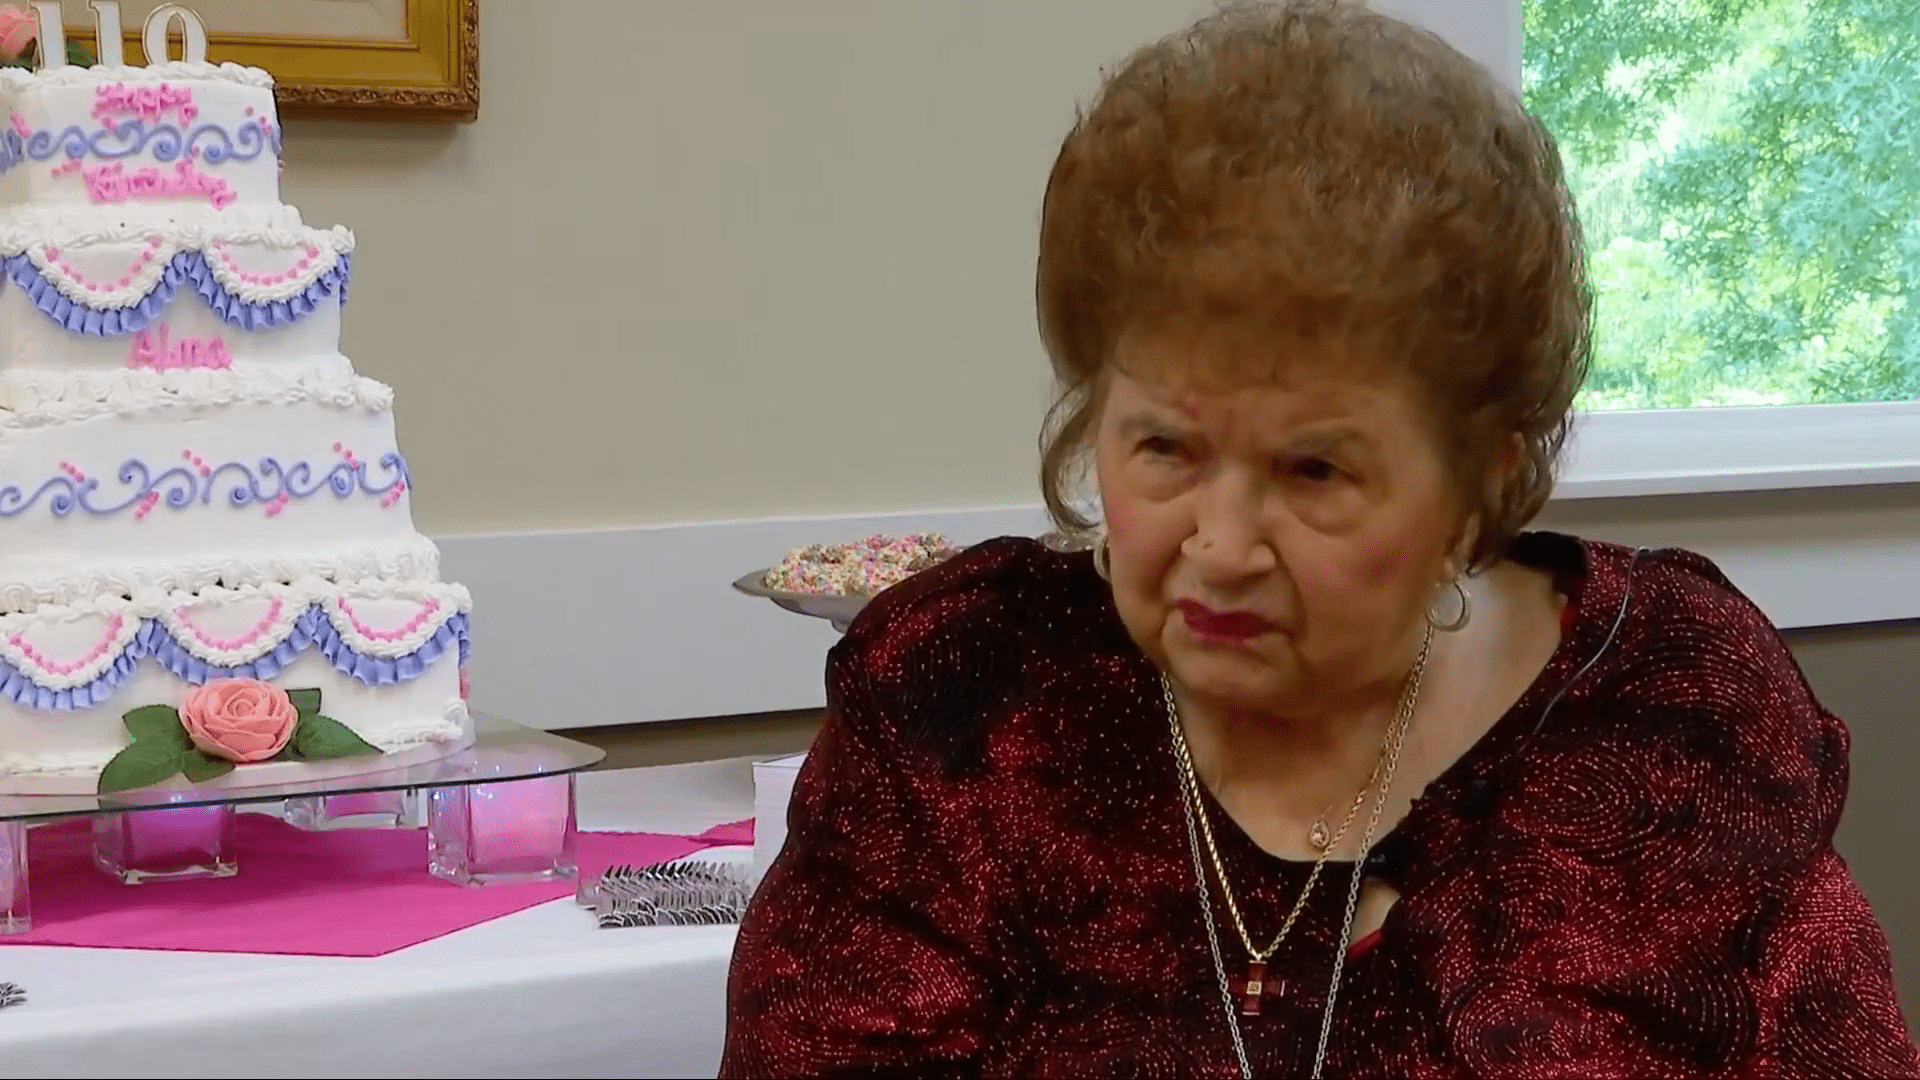 110-year-old Alma Kahl dressed in red and sitting next to her birthday cake. | Source: WOWK 13 News